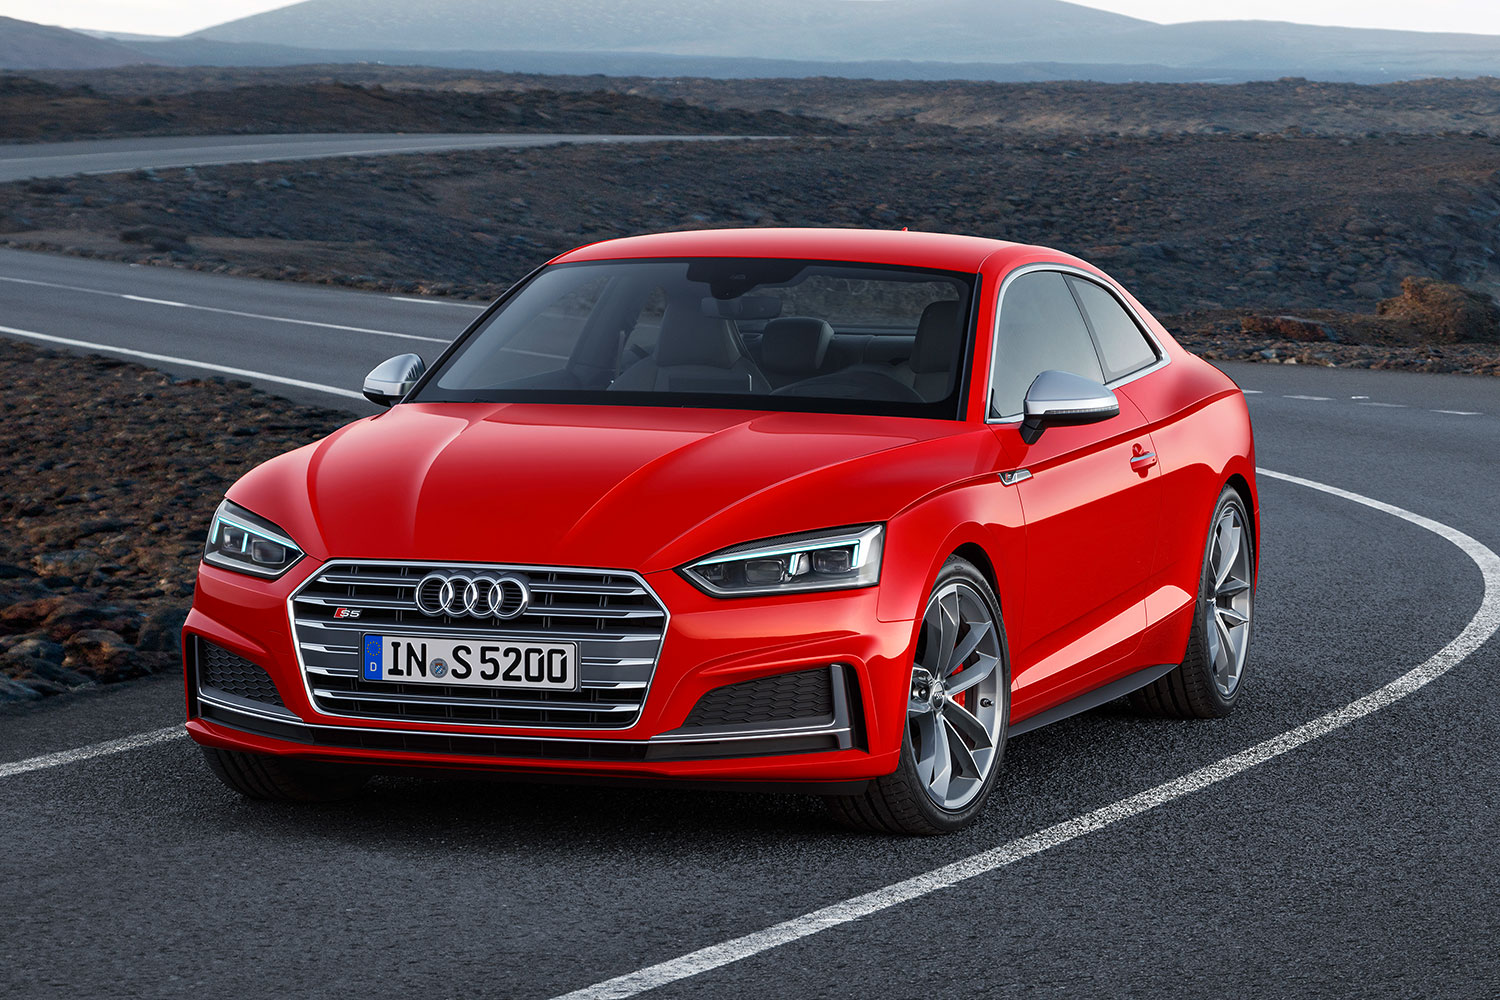 2017 audi a5 news pictures specs performance s5 coupe 0013